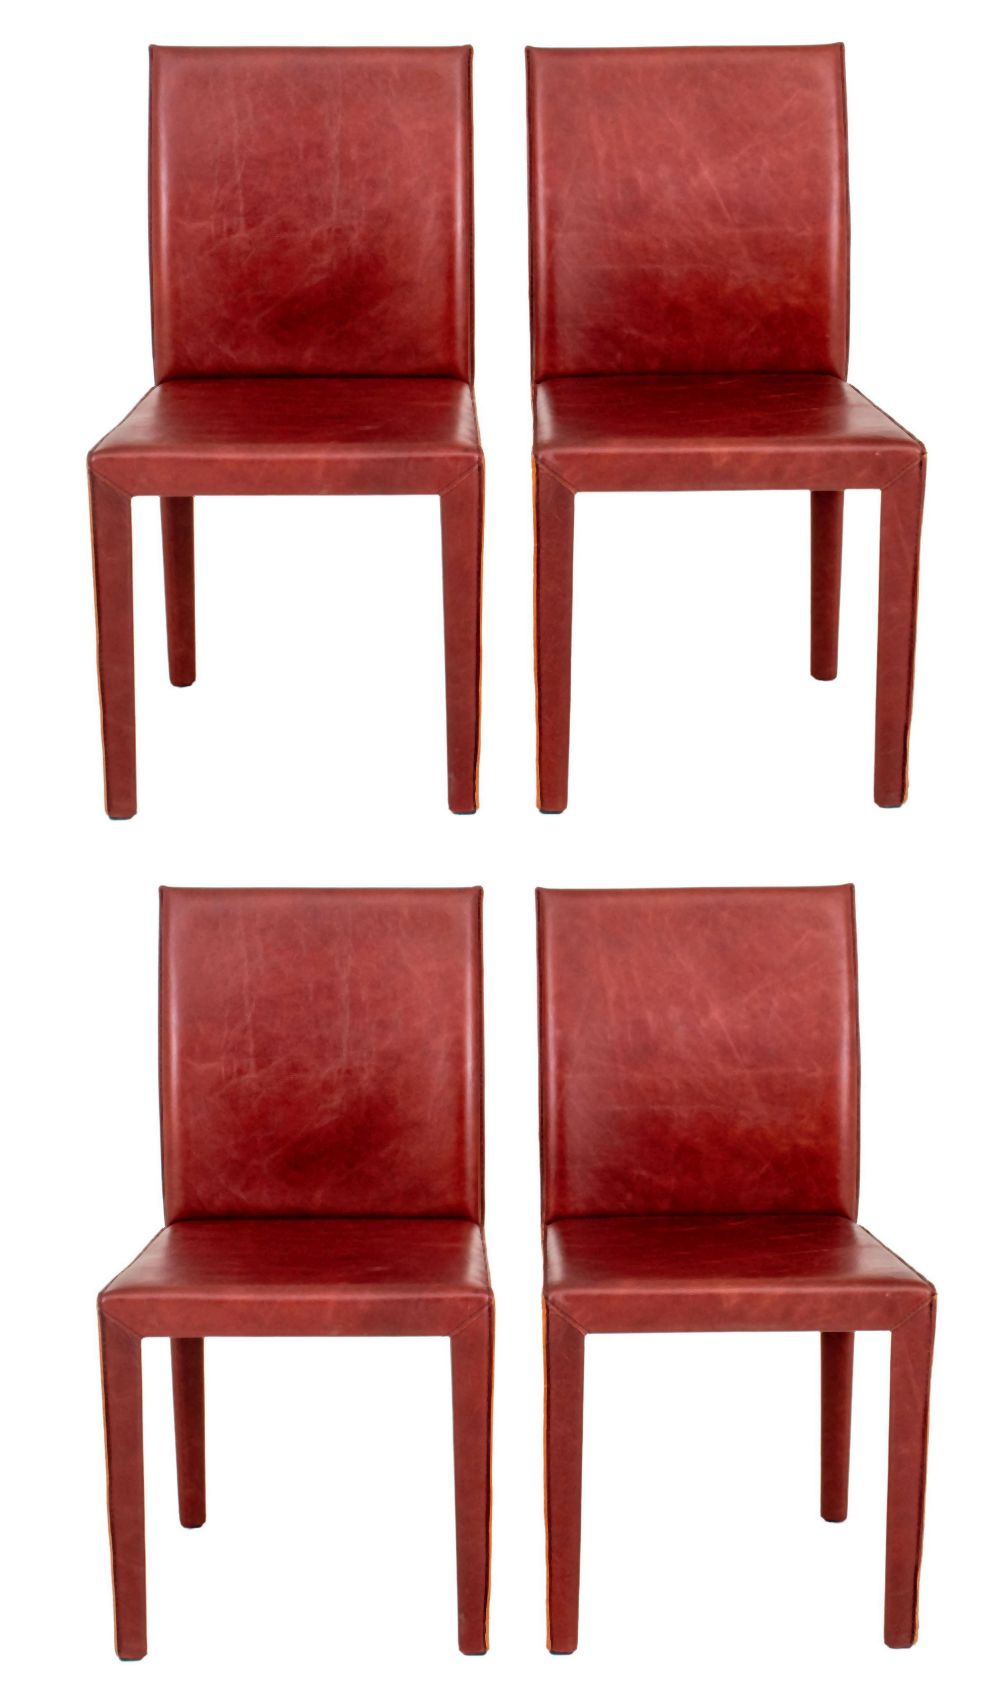 MARIO BELLINI STYLE SIDE CHAIRS  3ceb11